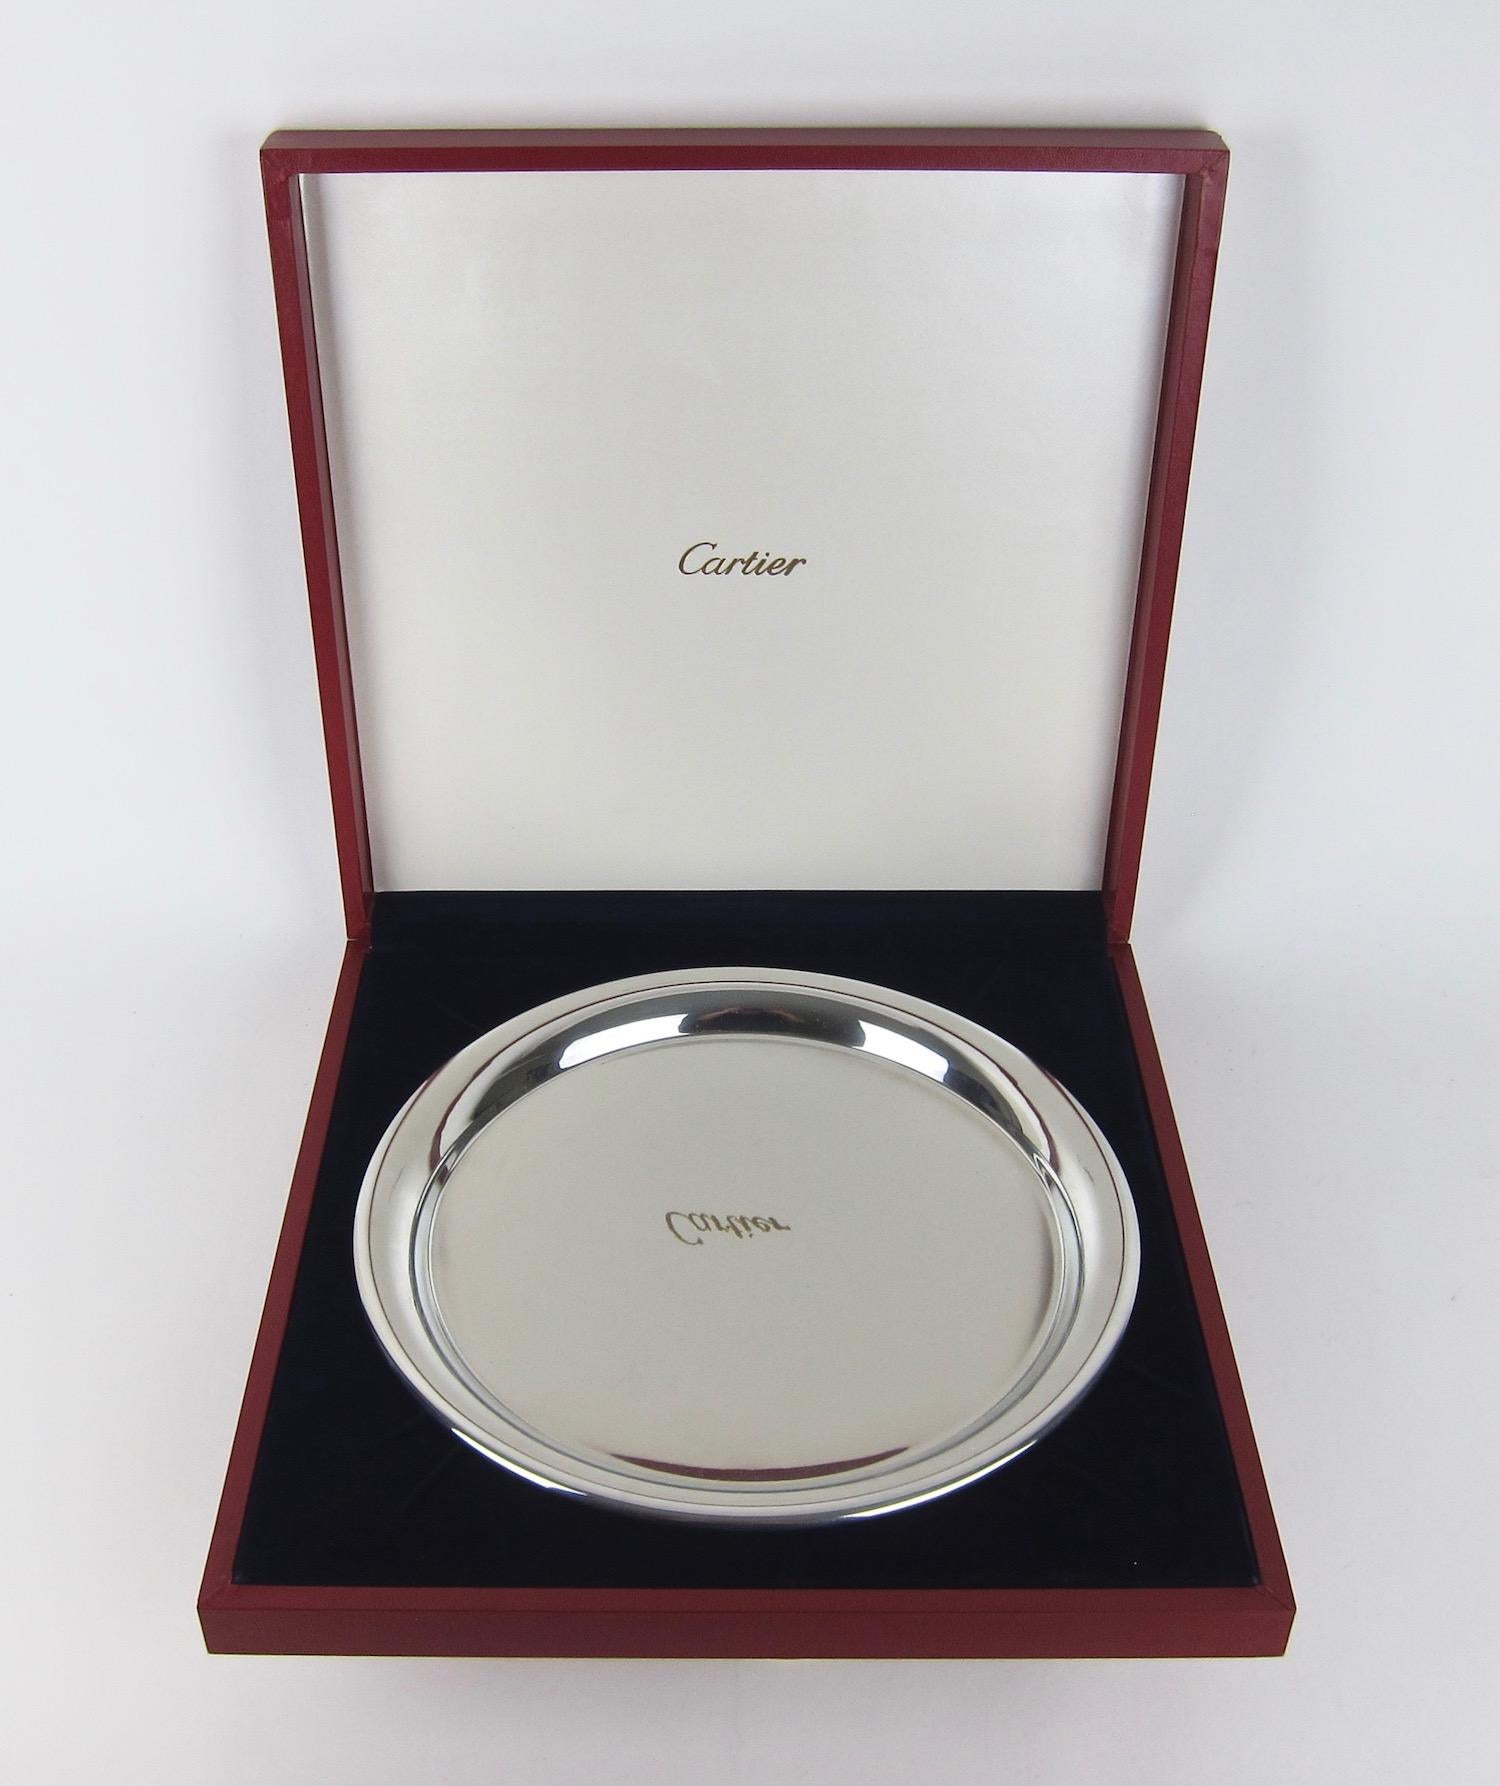 Modern Vintage Cartier Polished Pewter Silver Tray with Original Red Presentation Box